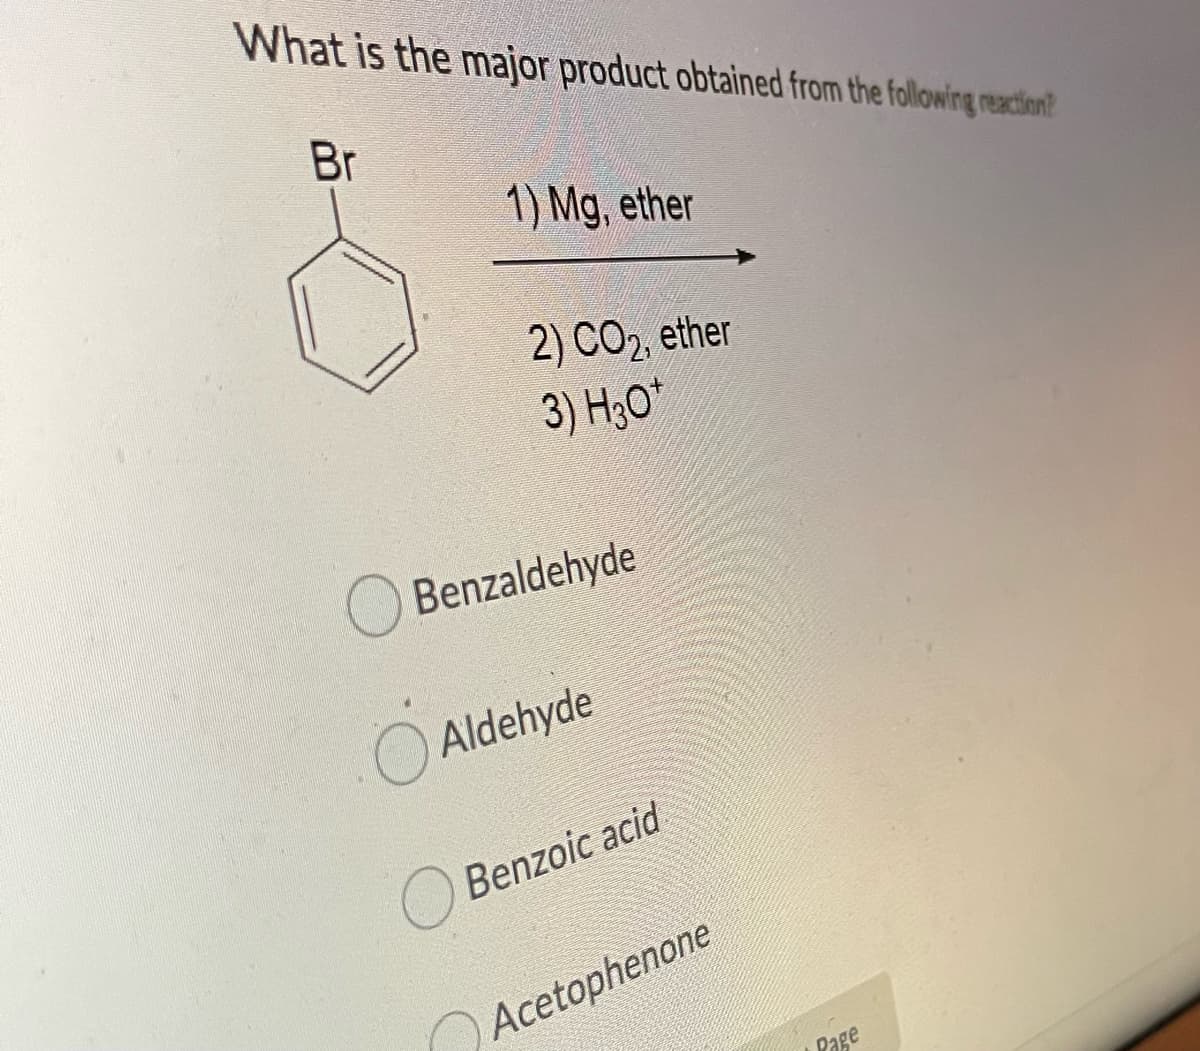 What is the major product obtained from the following reactien?
Br
1) Mg, ether
2) СО, ether
3) H;0*
Benzaldehyde
O Aldehyde
O Benzoic acid
Acetophenone
Page
